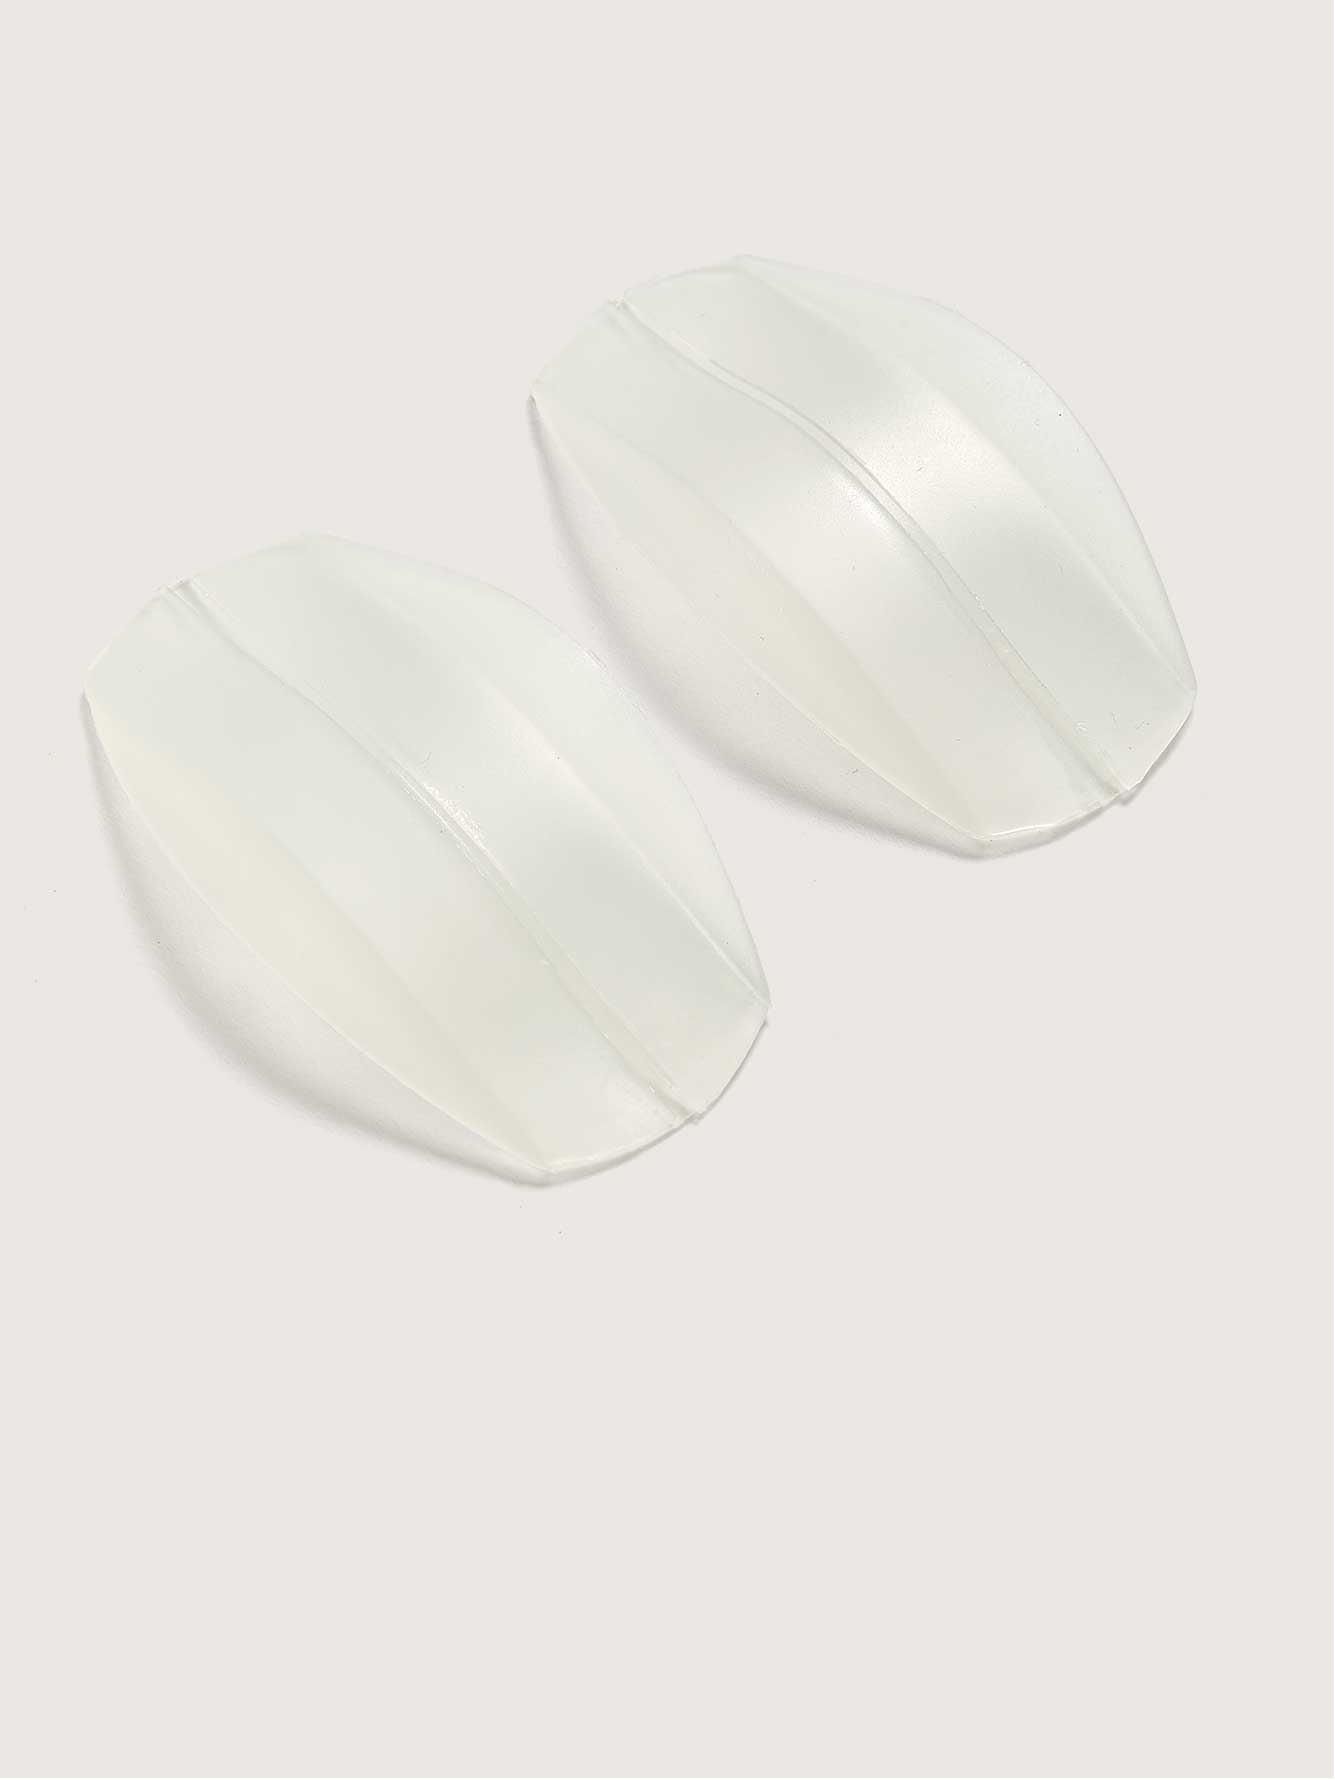 Silicone Shoulder Cushions - BeConfident